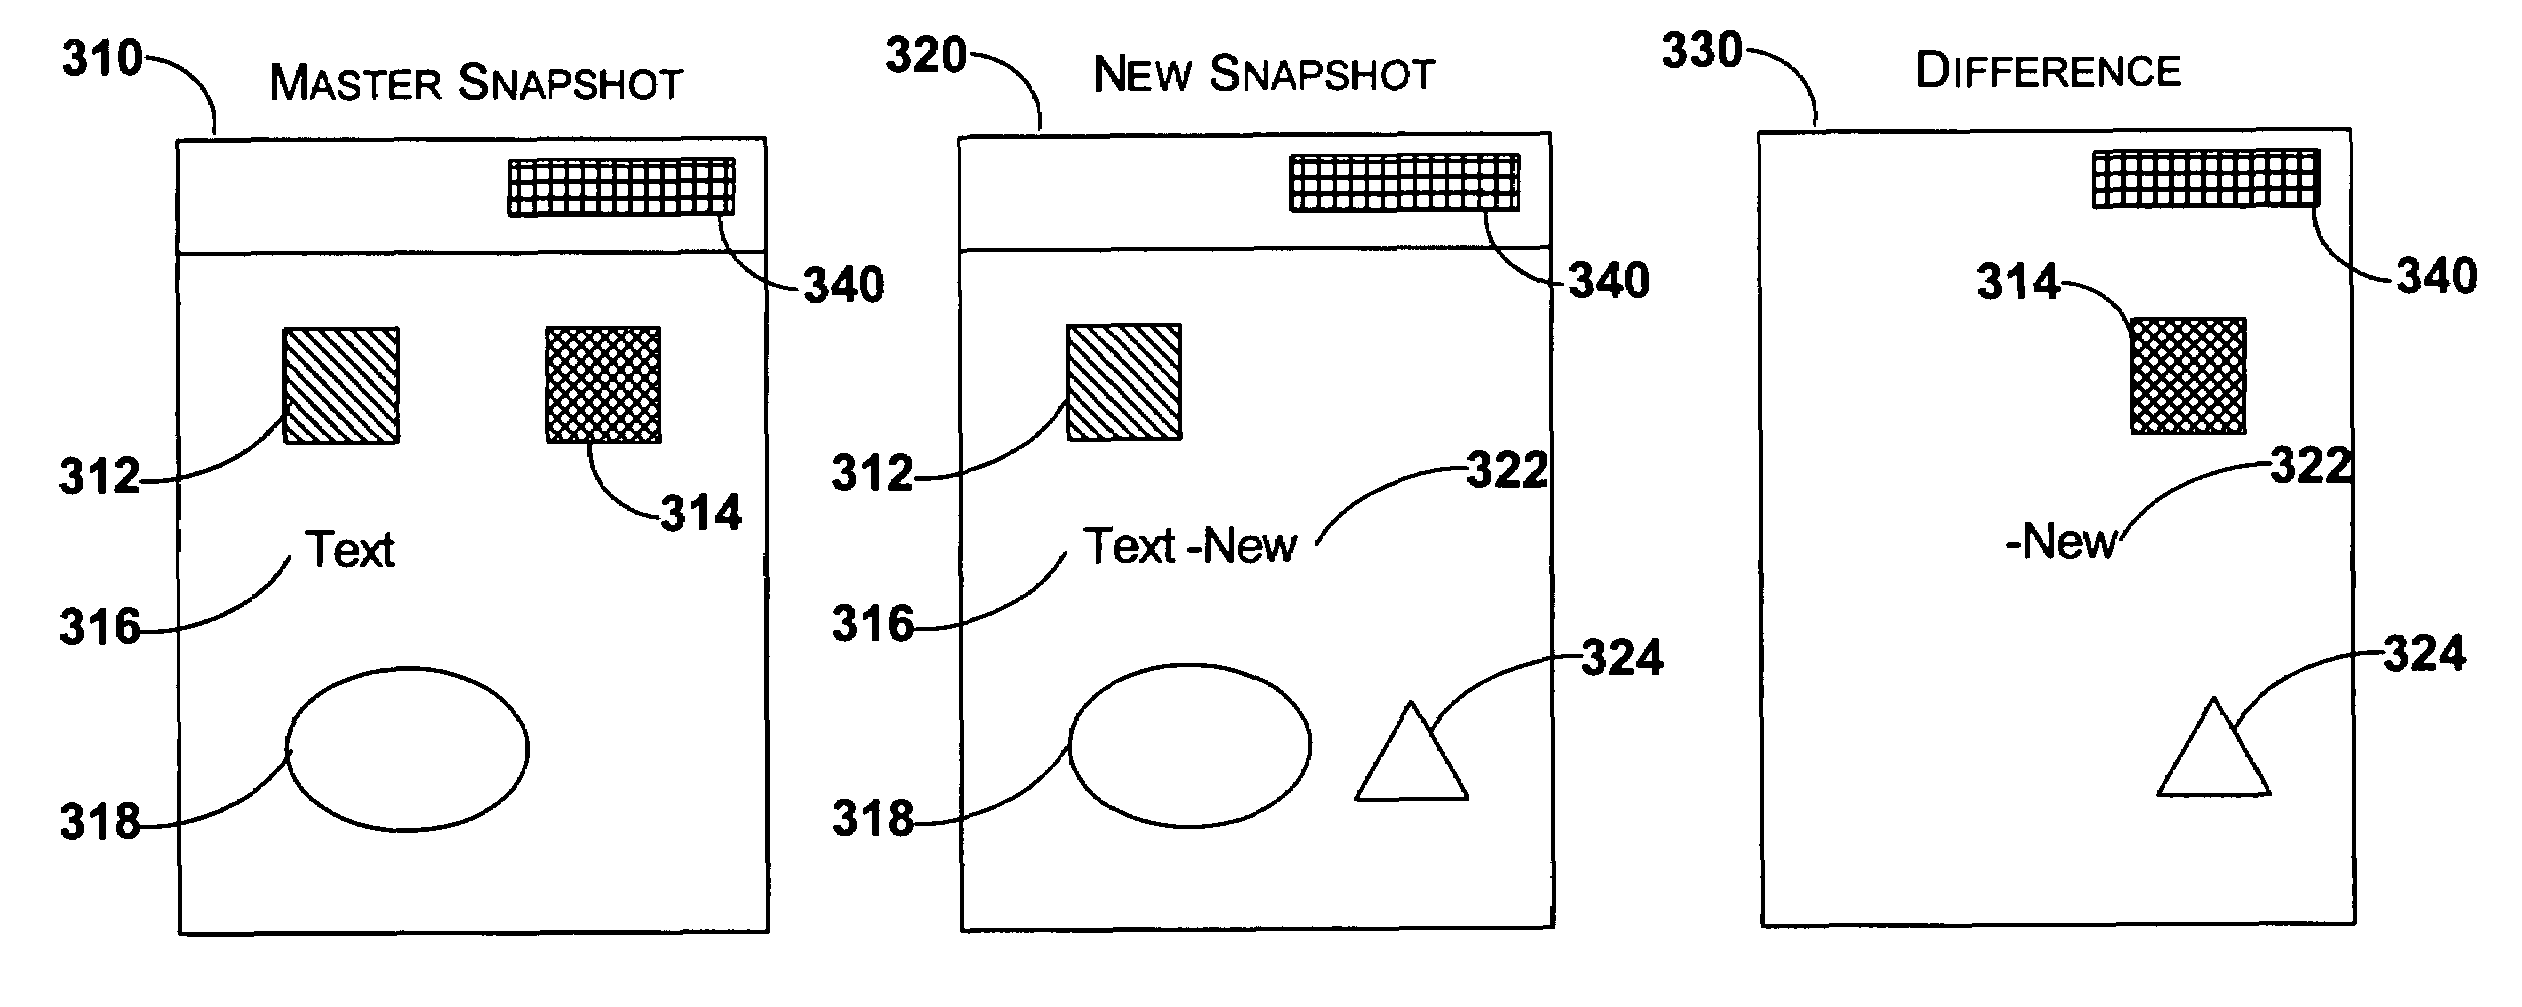 Method and system for masking dynamic regions in a user interface to enable testing of user interface consistency